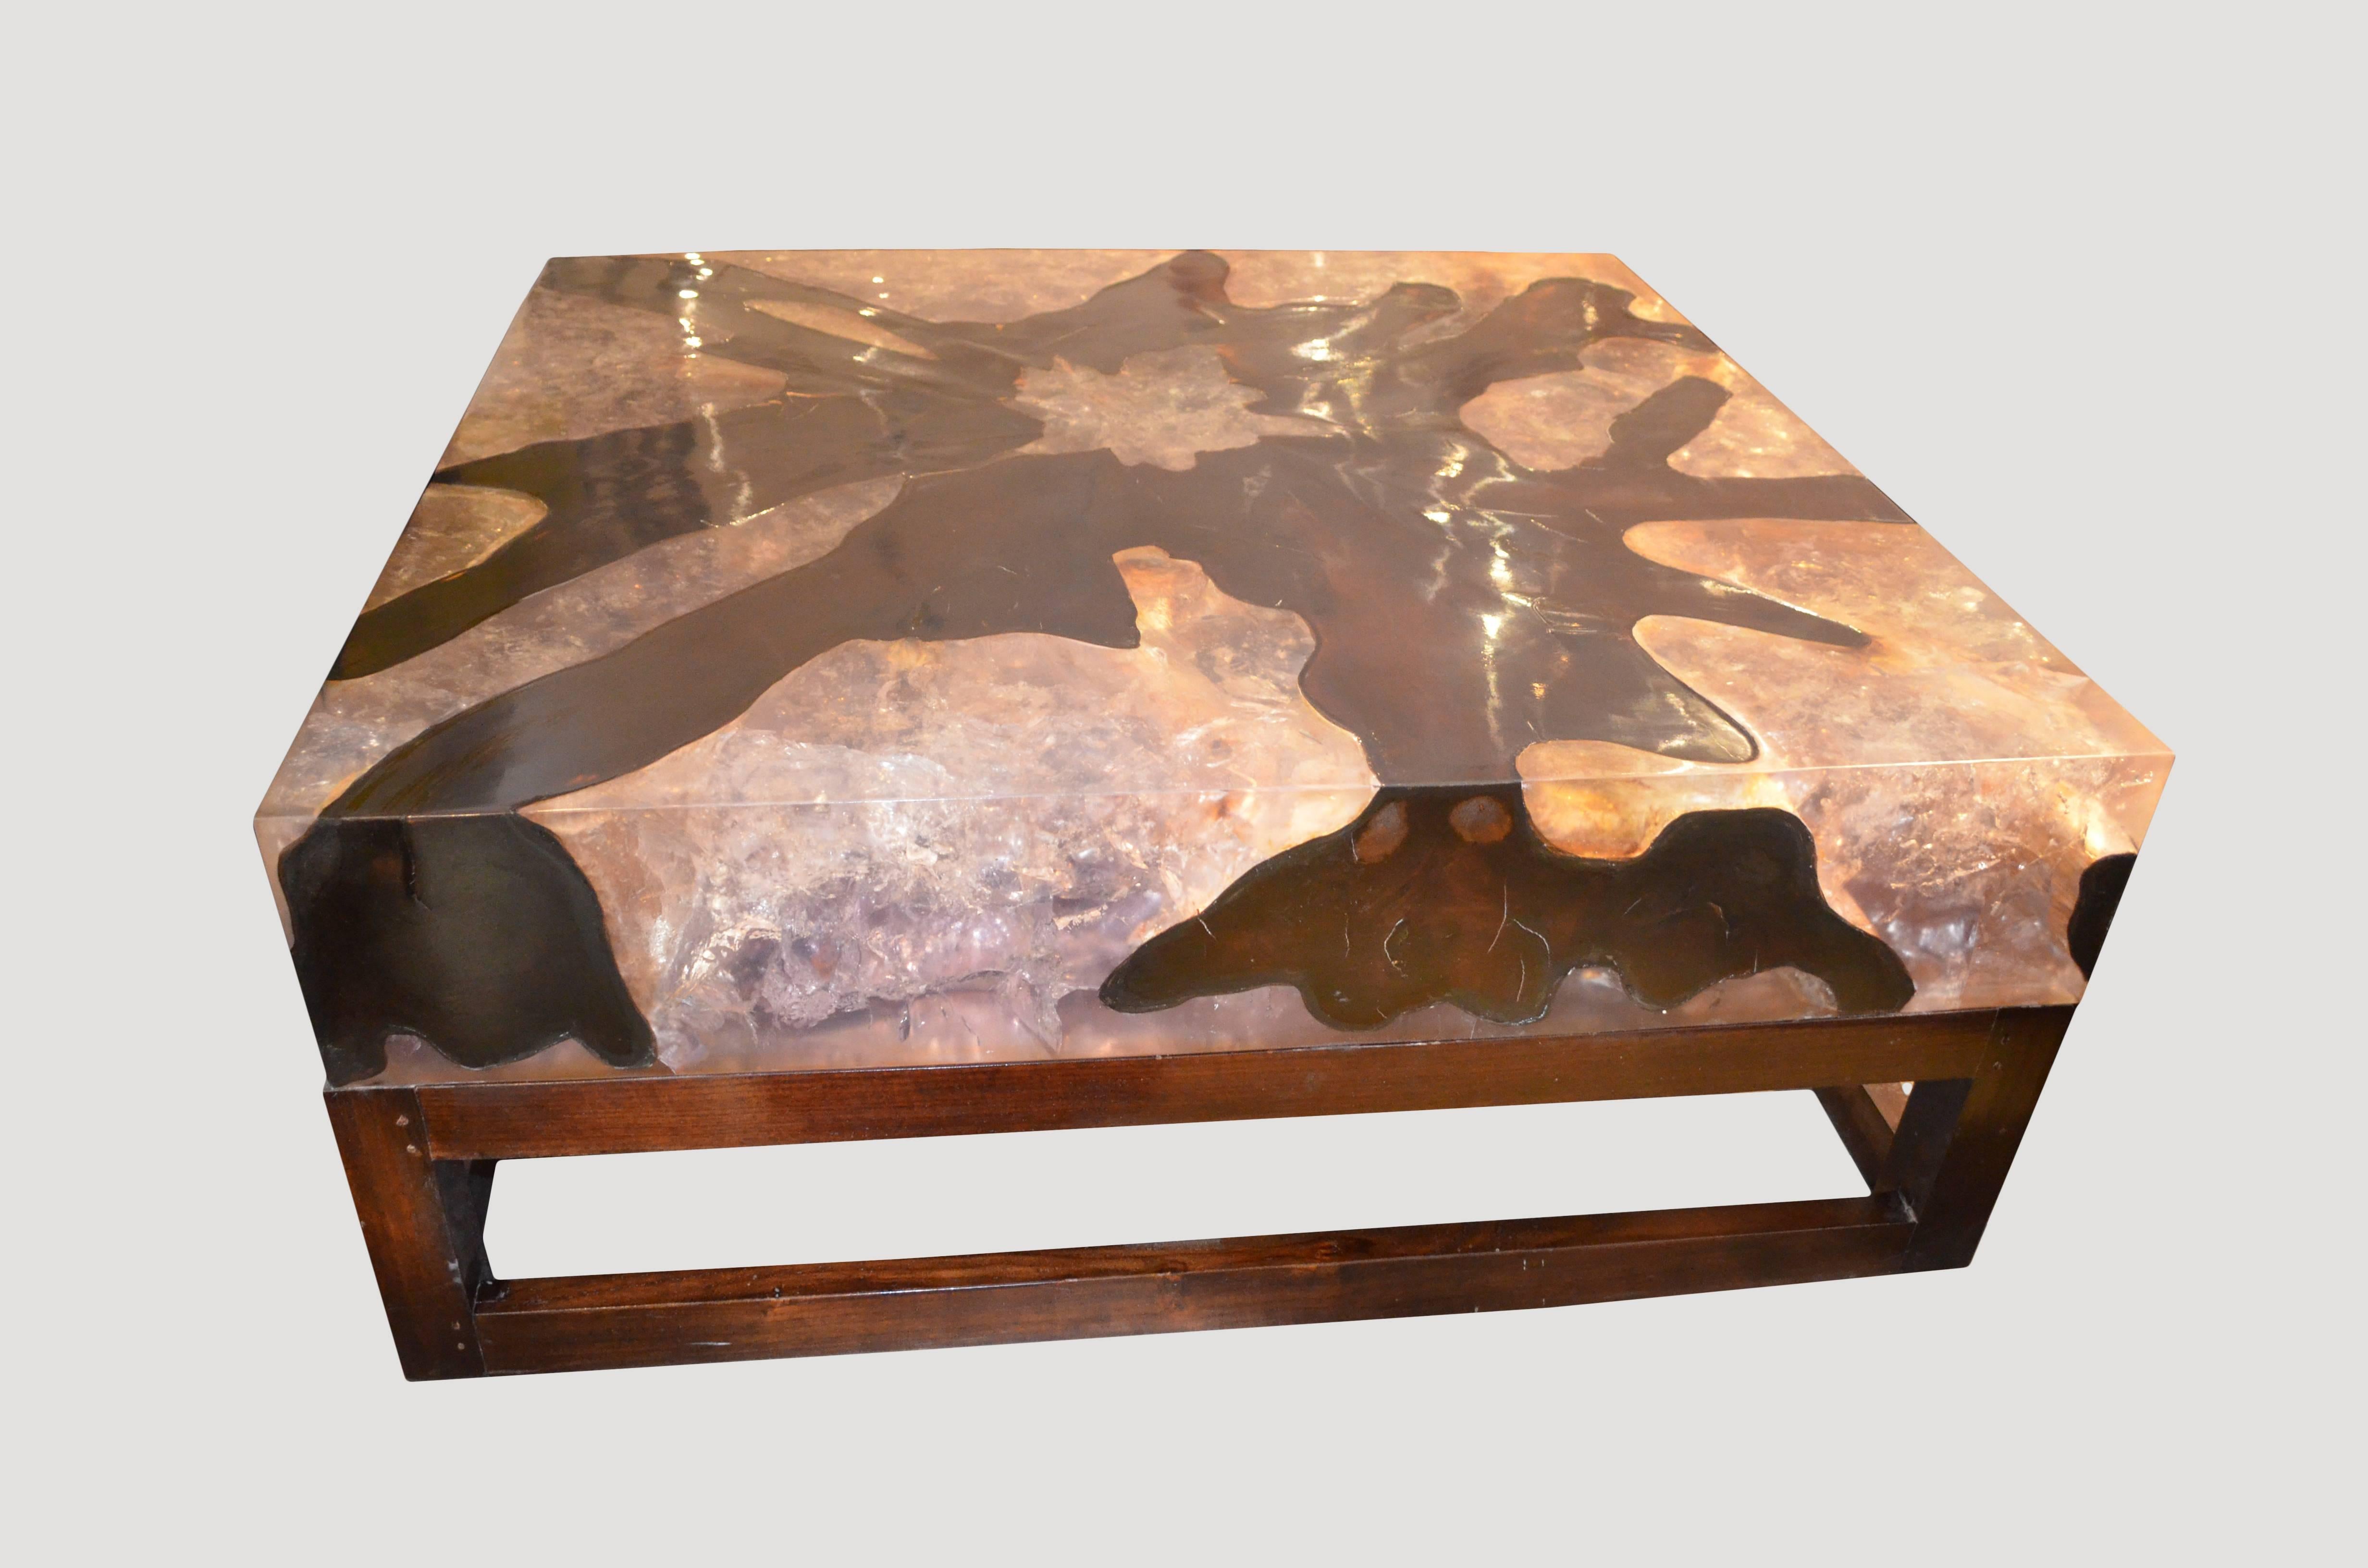 cracked resin table